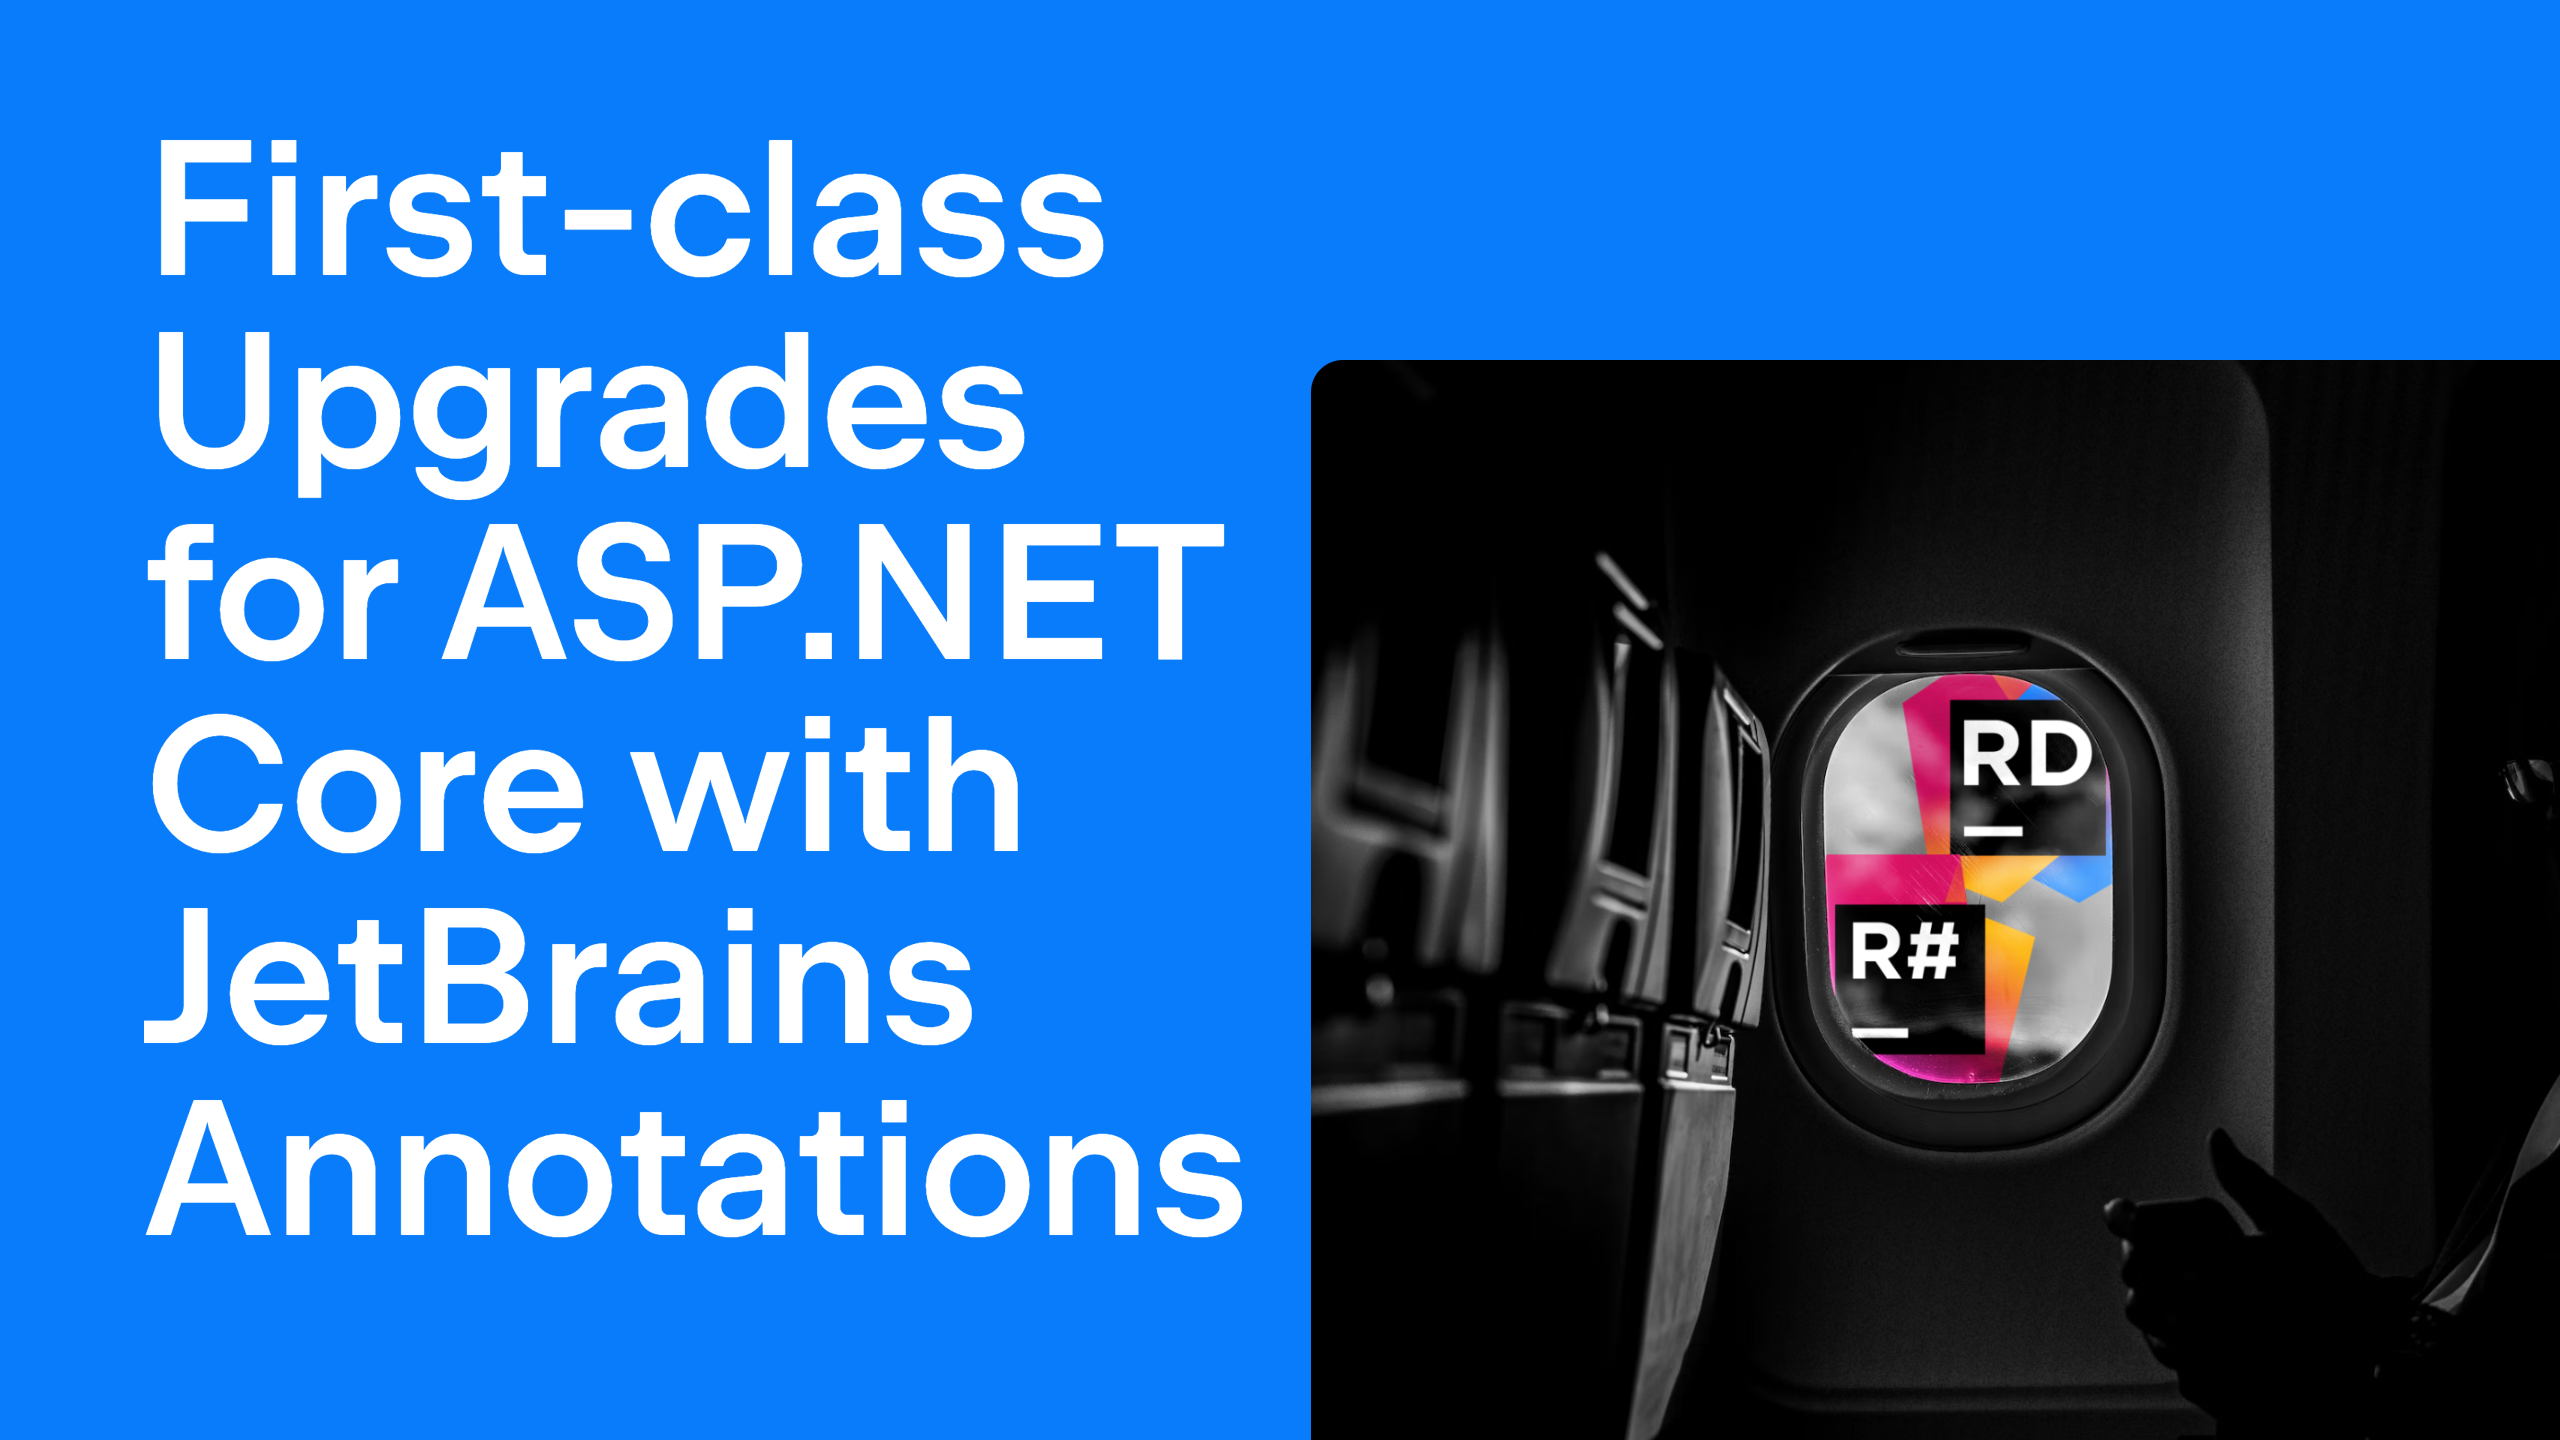 First-class Upgrades for ASP.NET Core with JetBrains Annotations